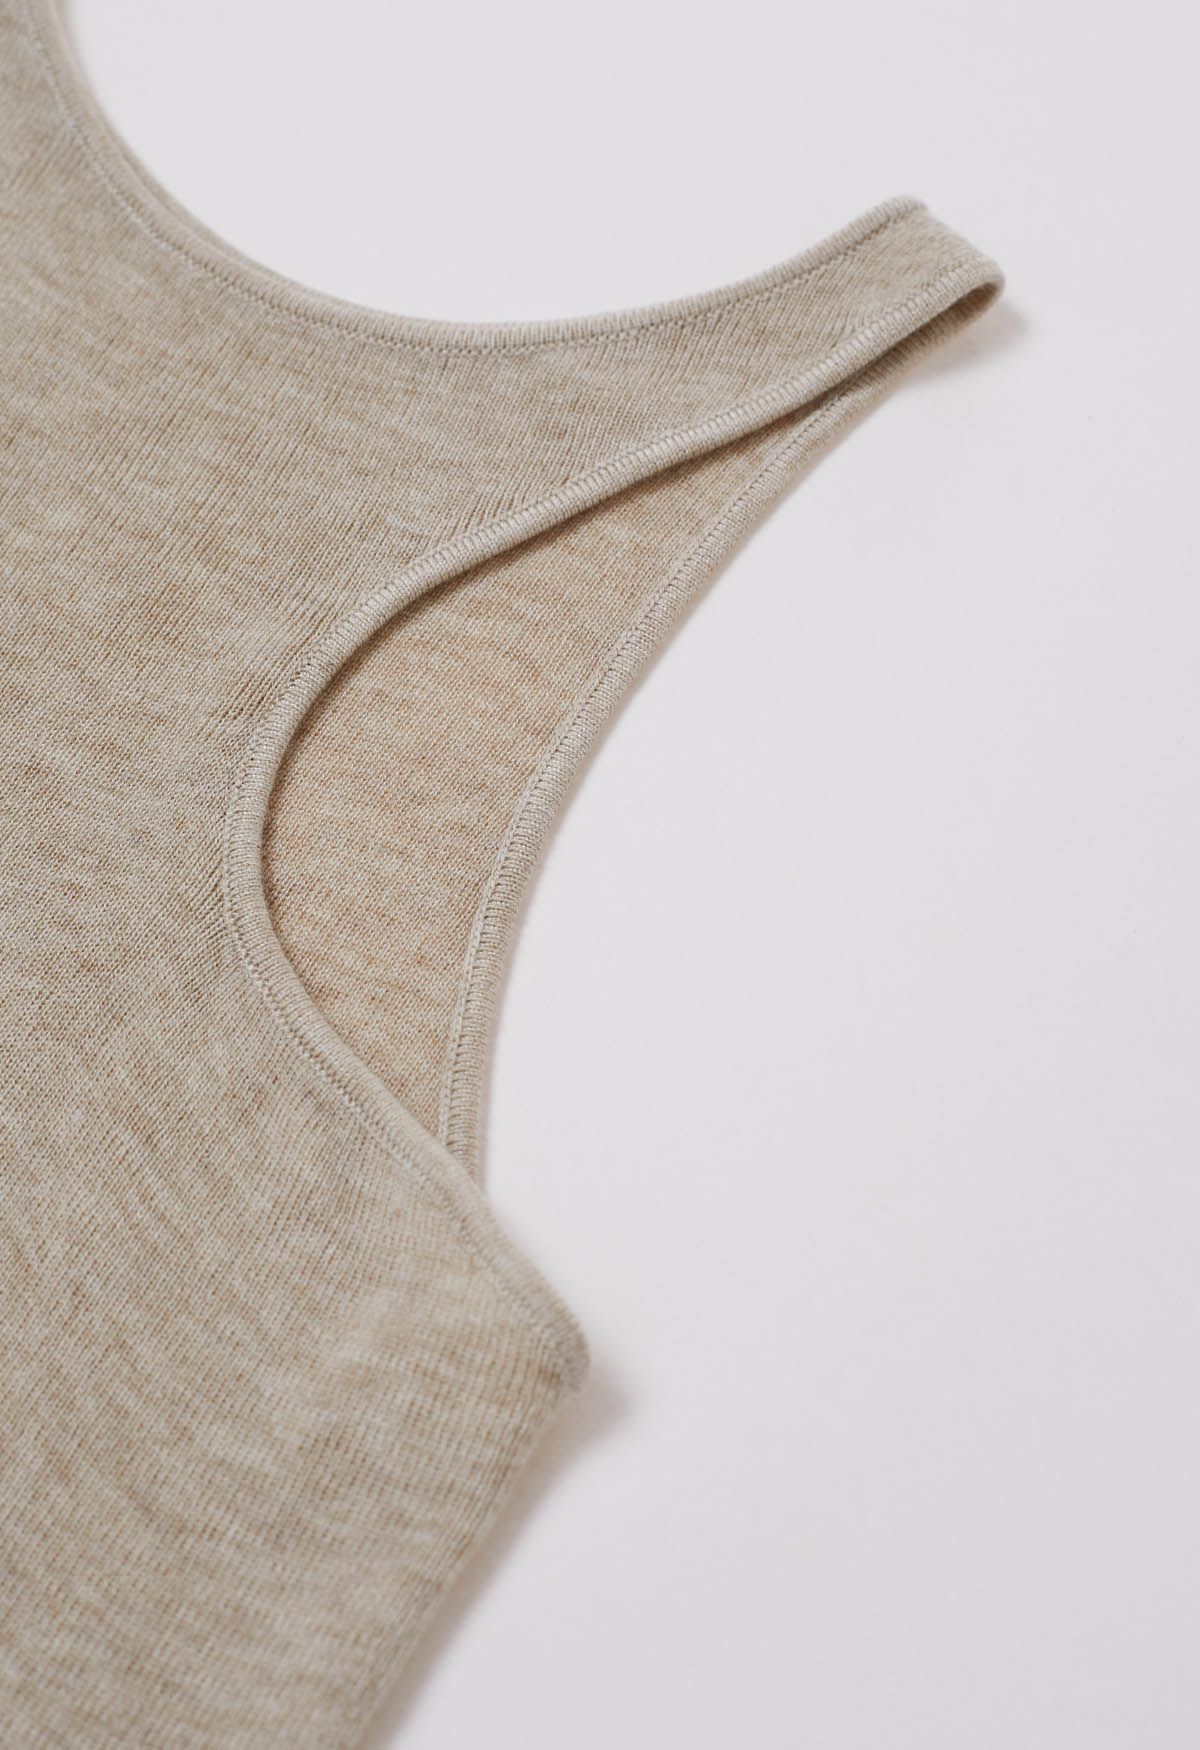 Chic Impression Knit Tank Top in Oatmeal